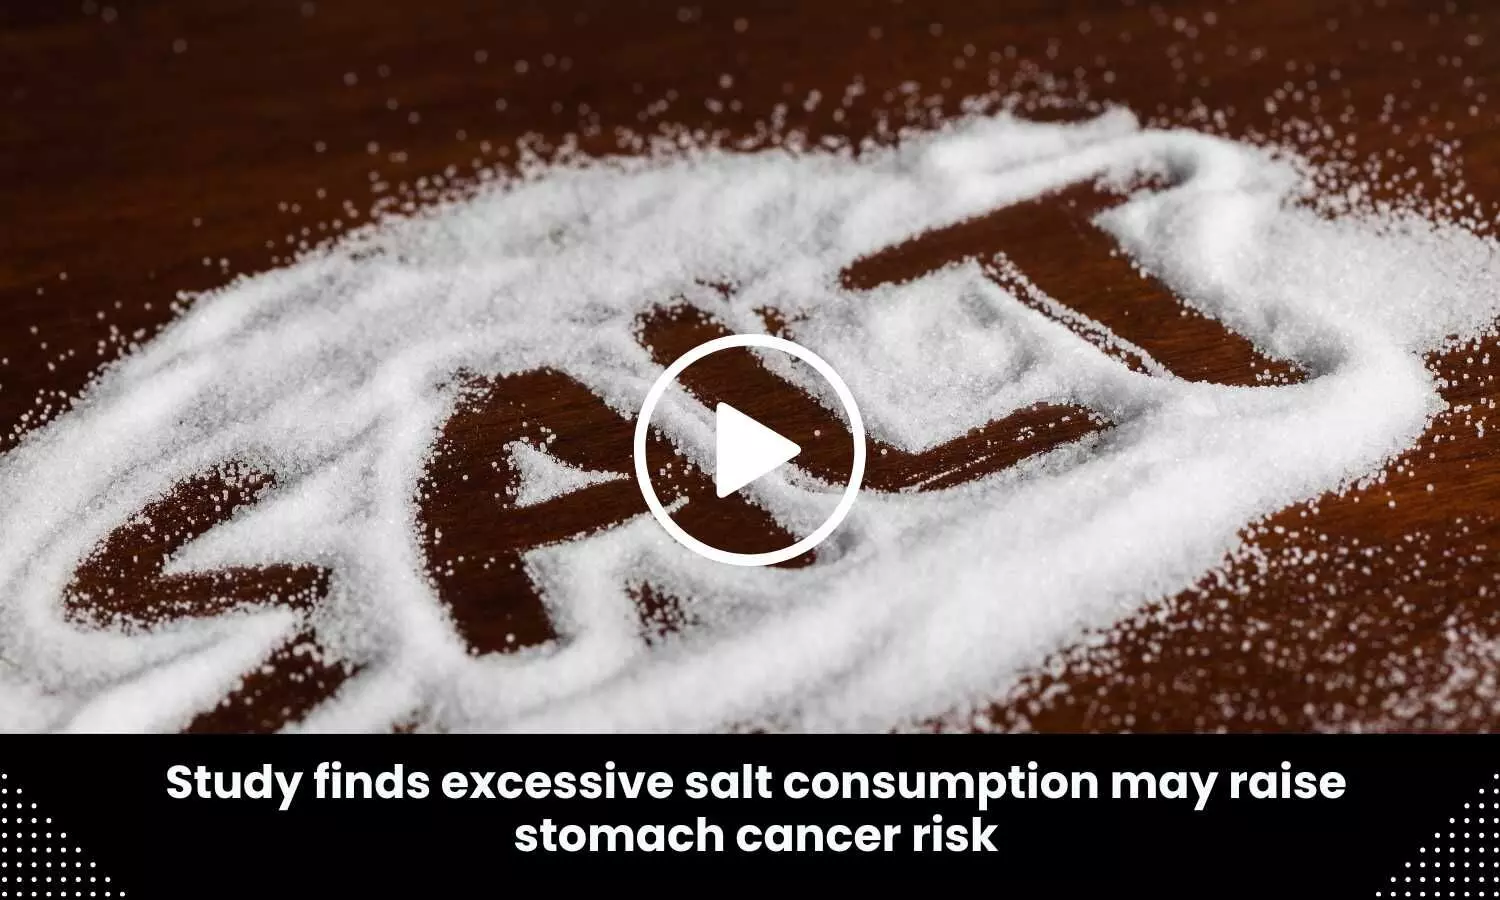 Study finds excessive salt consumption may raise stomach cancer risk